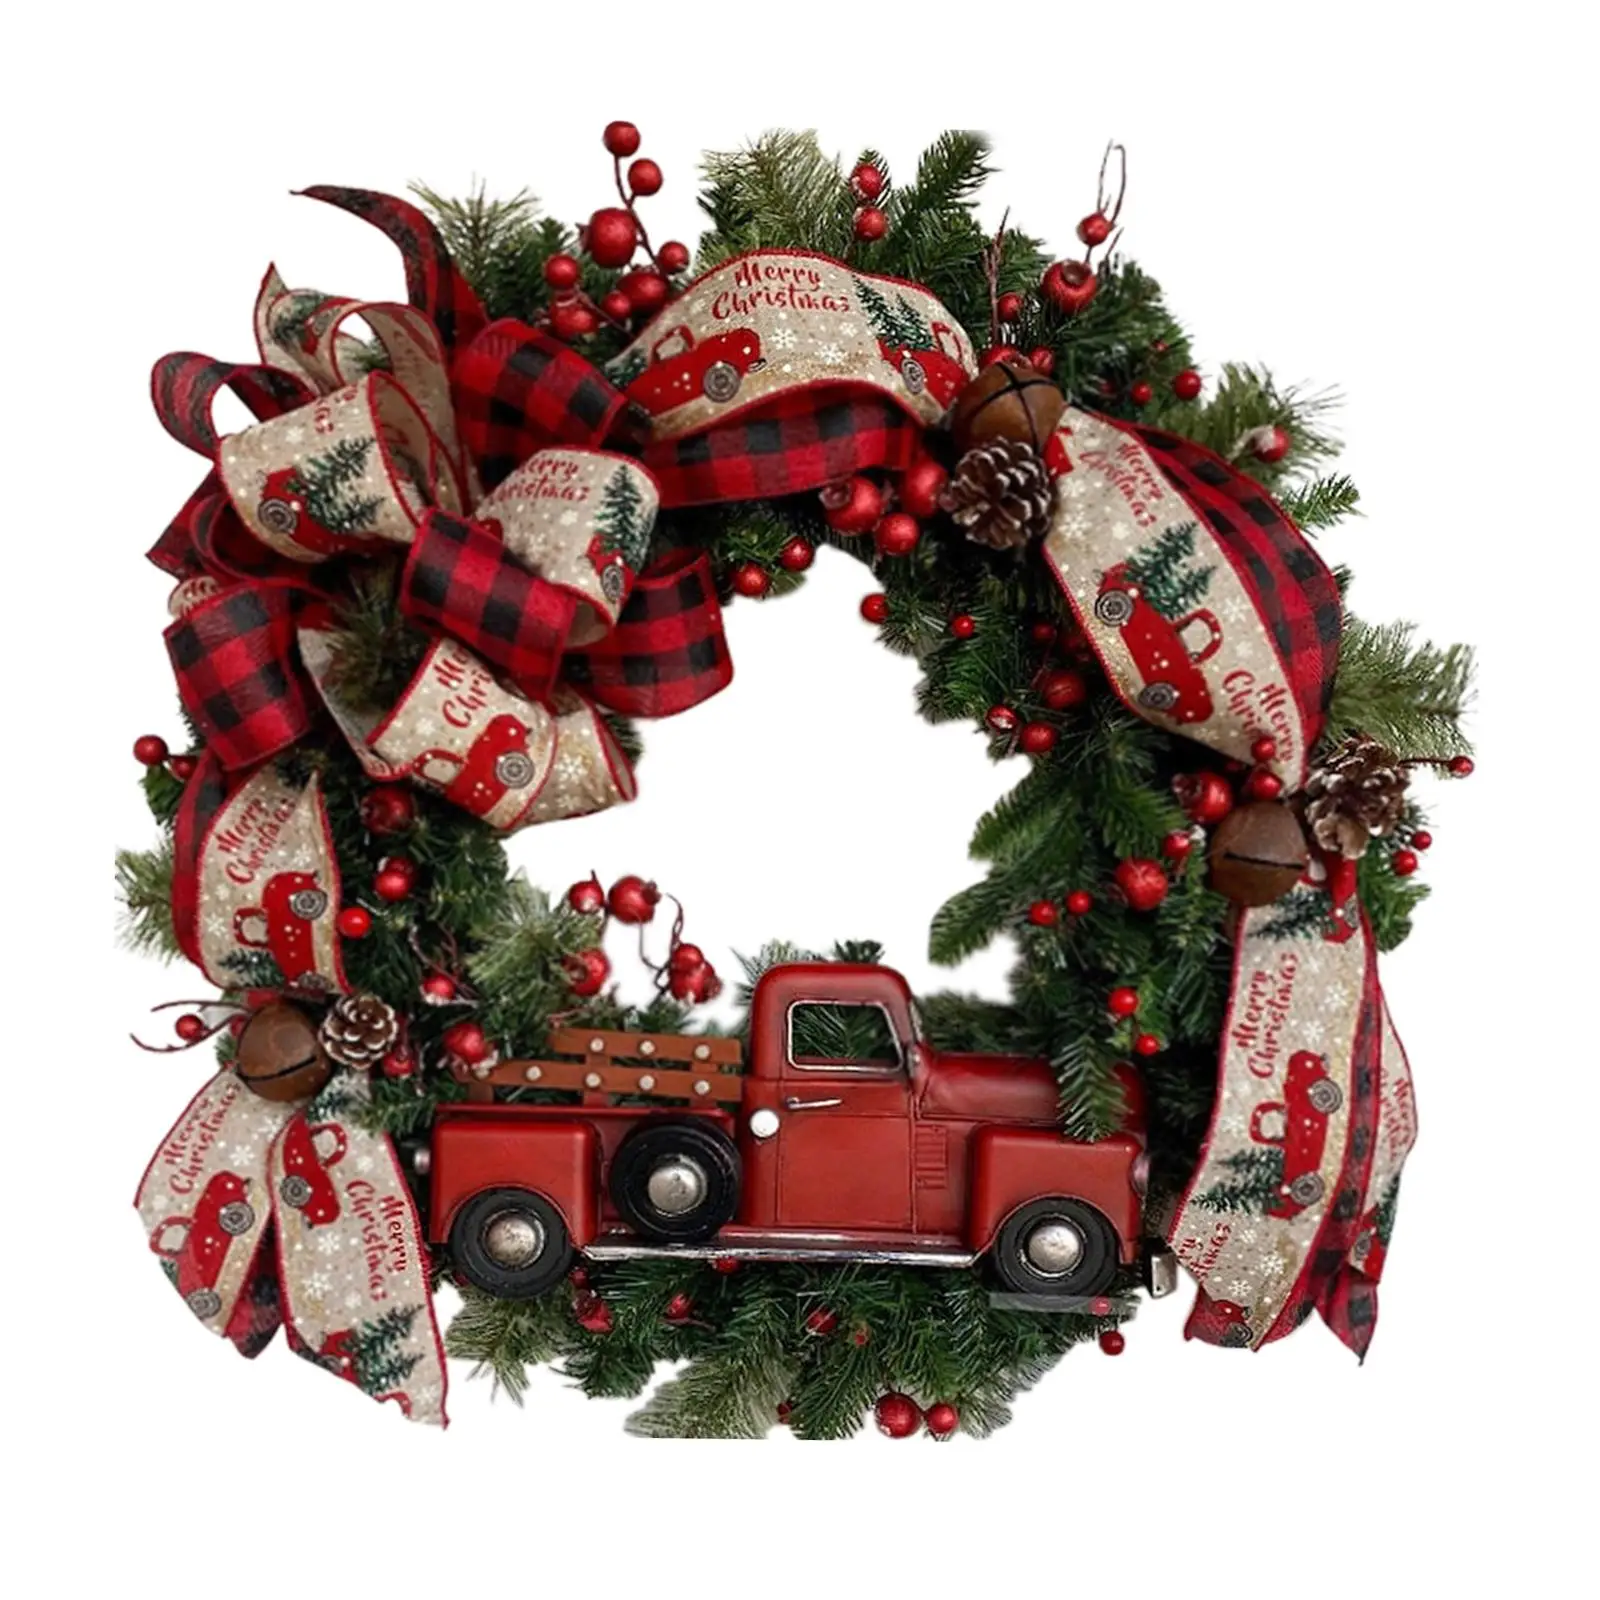 Christmas Artificial Floral Wreath with Red Berries Front Door Wreath Decoration for Celebration Wall Farmhouse Festival Holiday